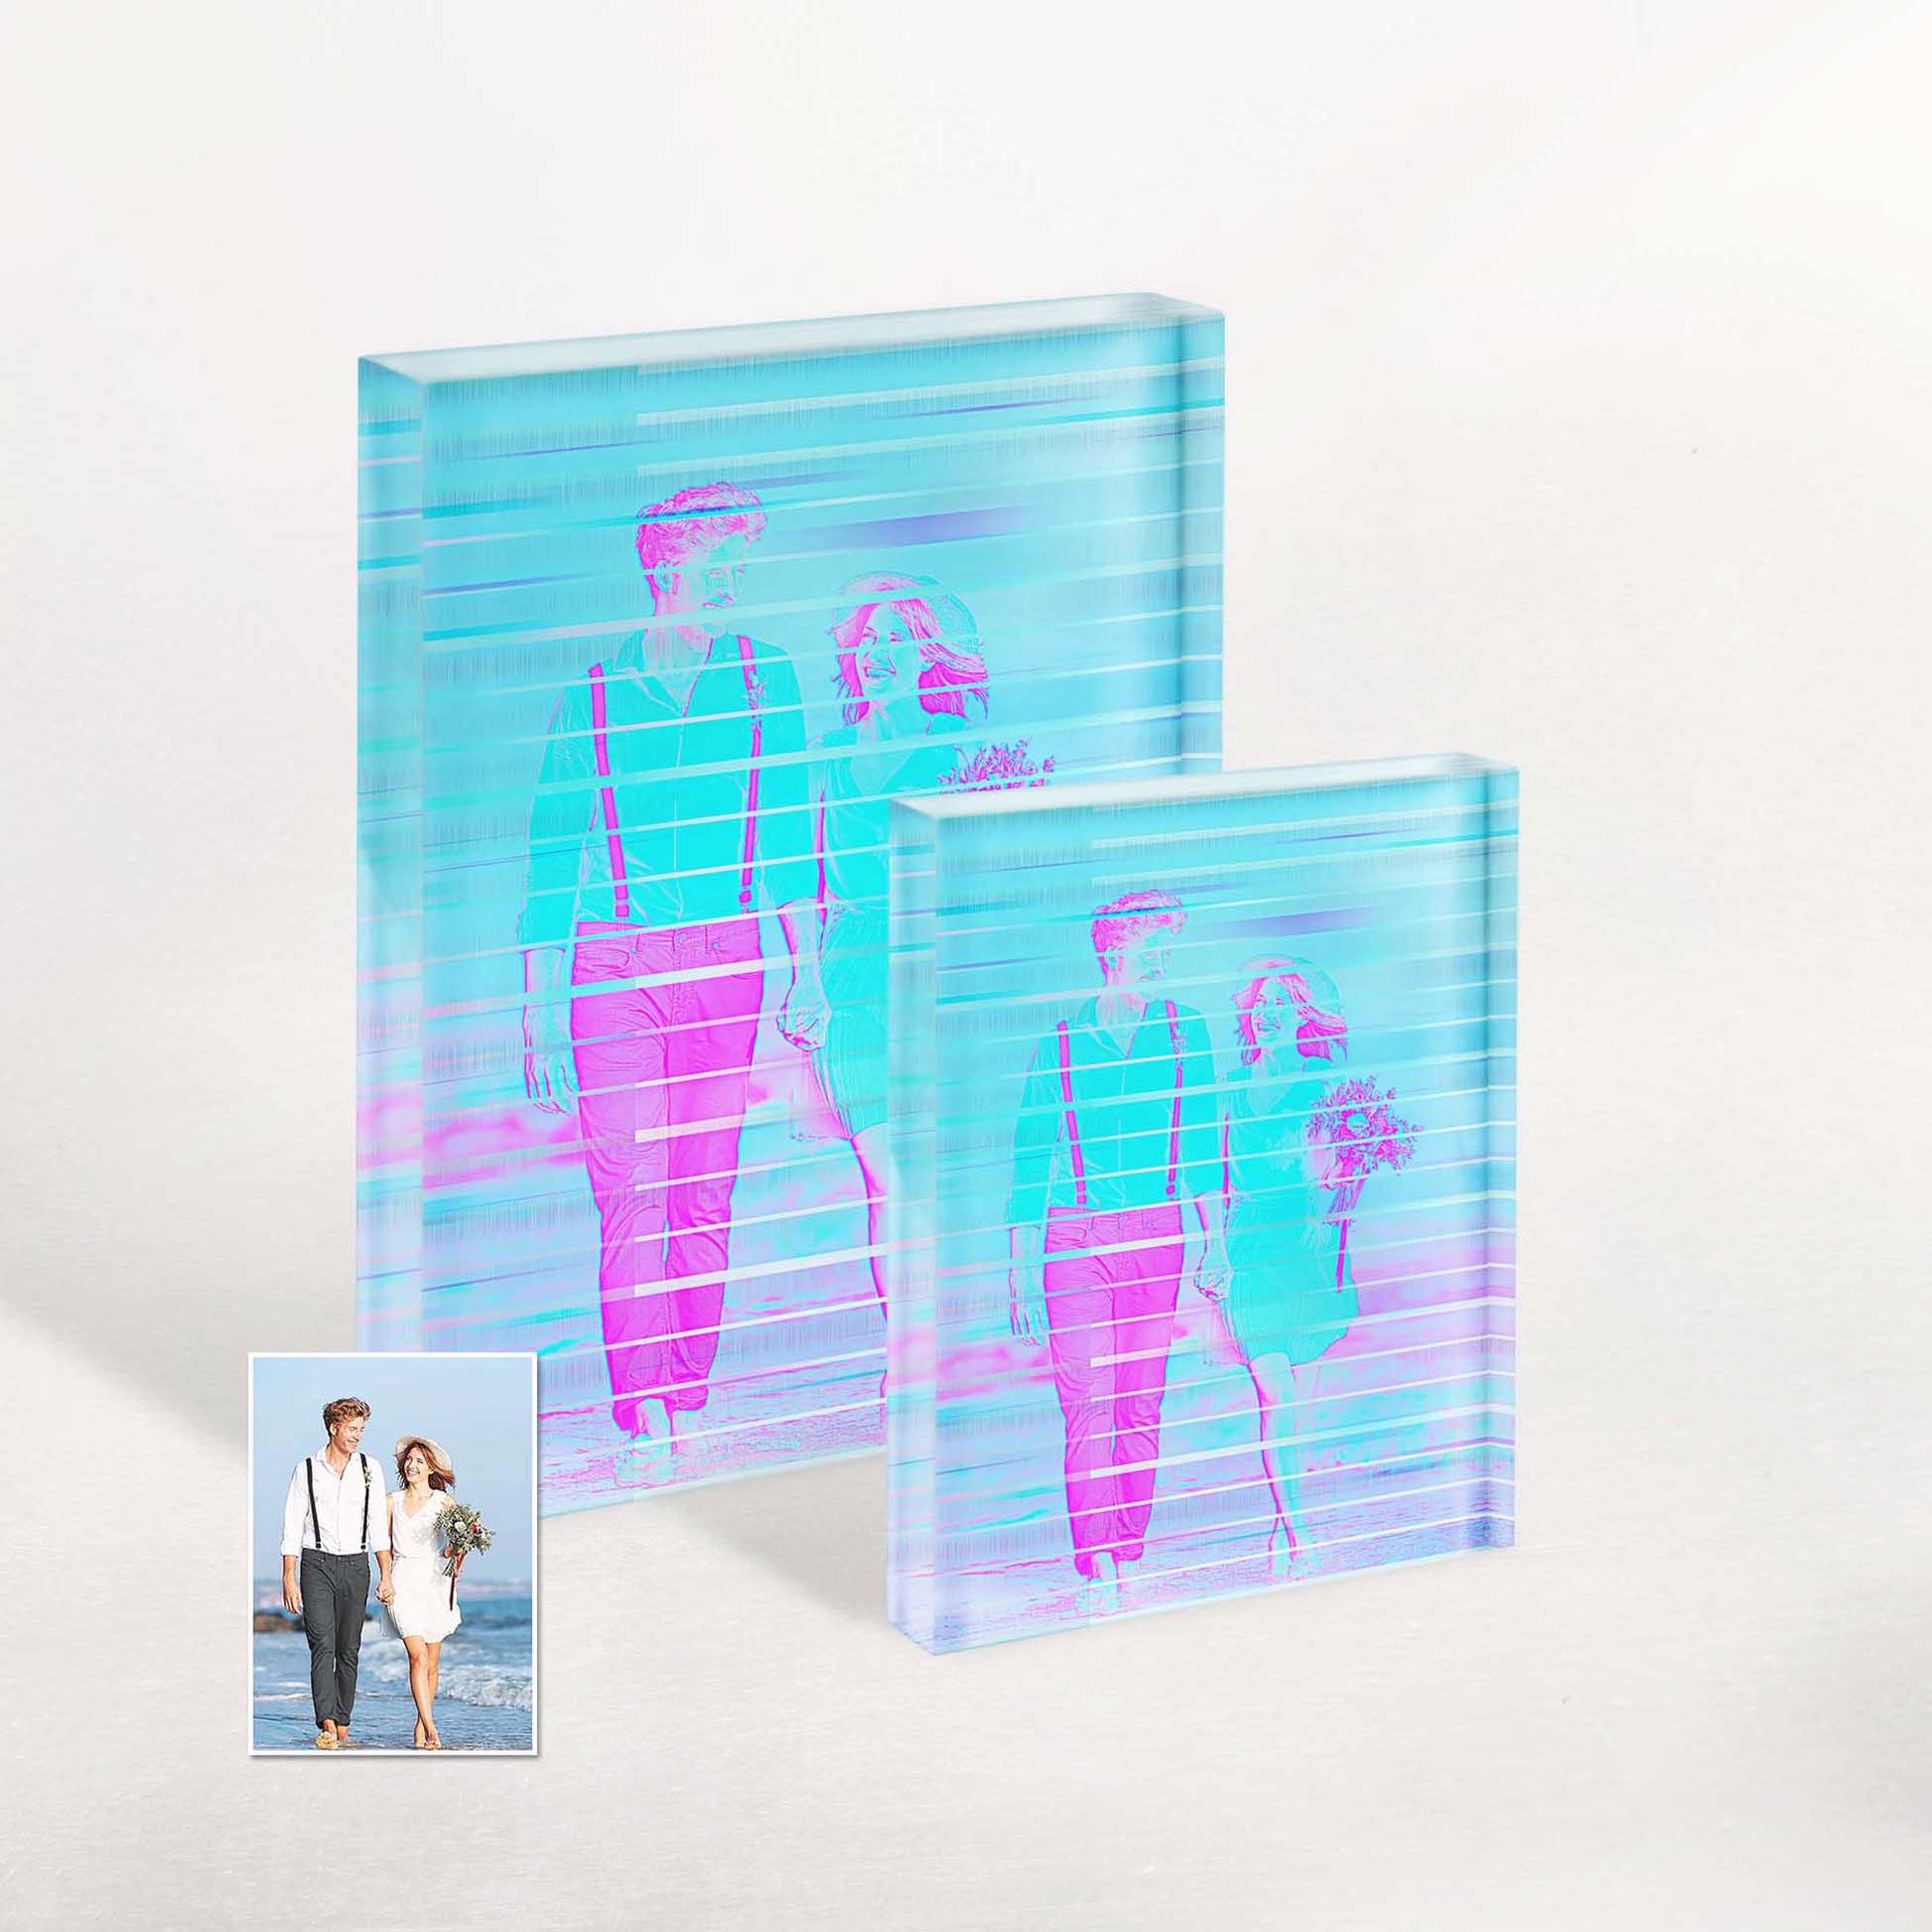 Customise a Modern Gift: Personalised Purple and Blue Signal Acrylic Block Photo. Surprise your loved ones with a cool and stylish birthday or anniversary present. The creative design and trendy colors make it a standout choice.